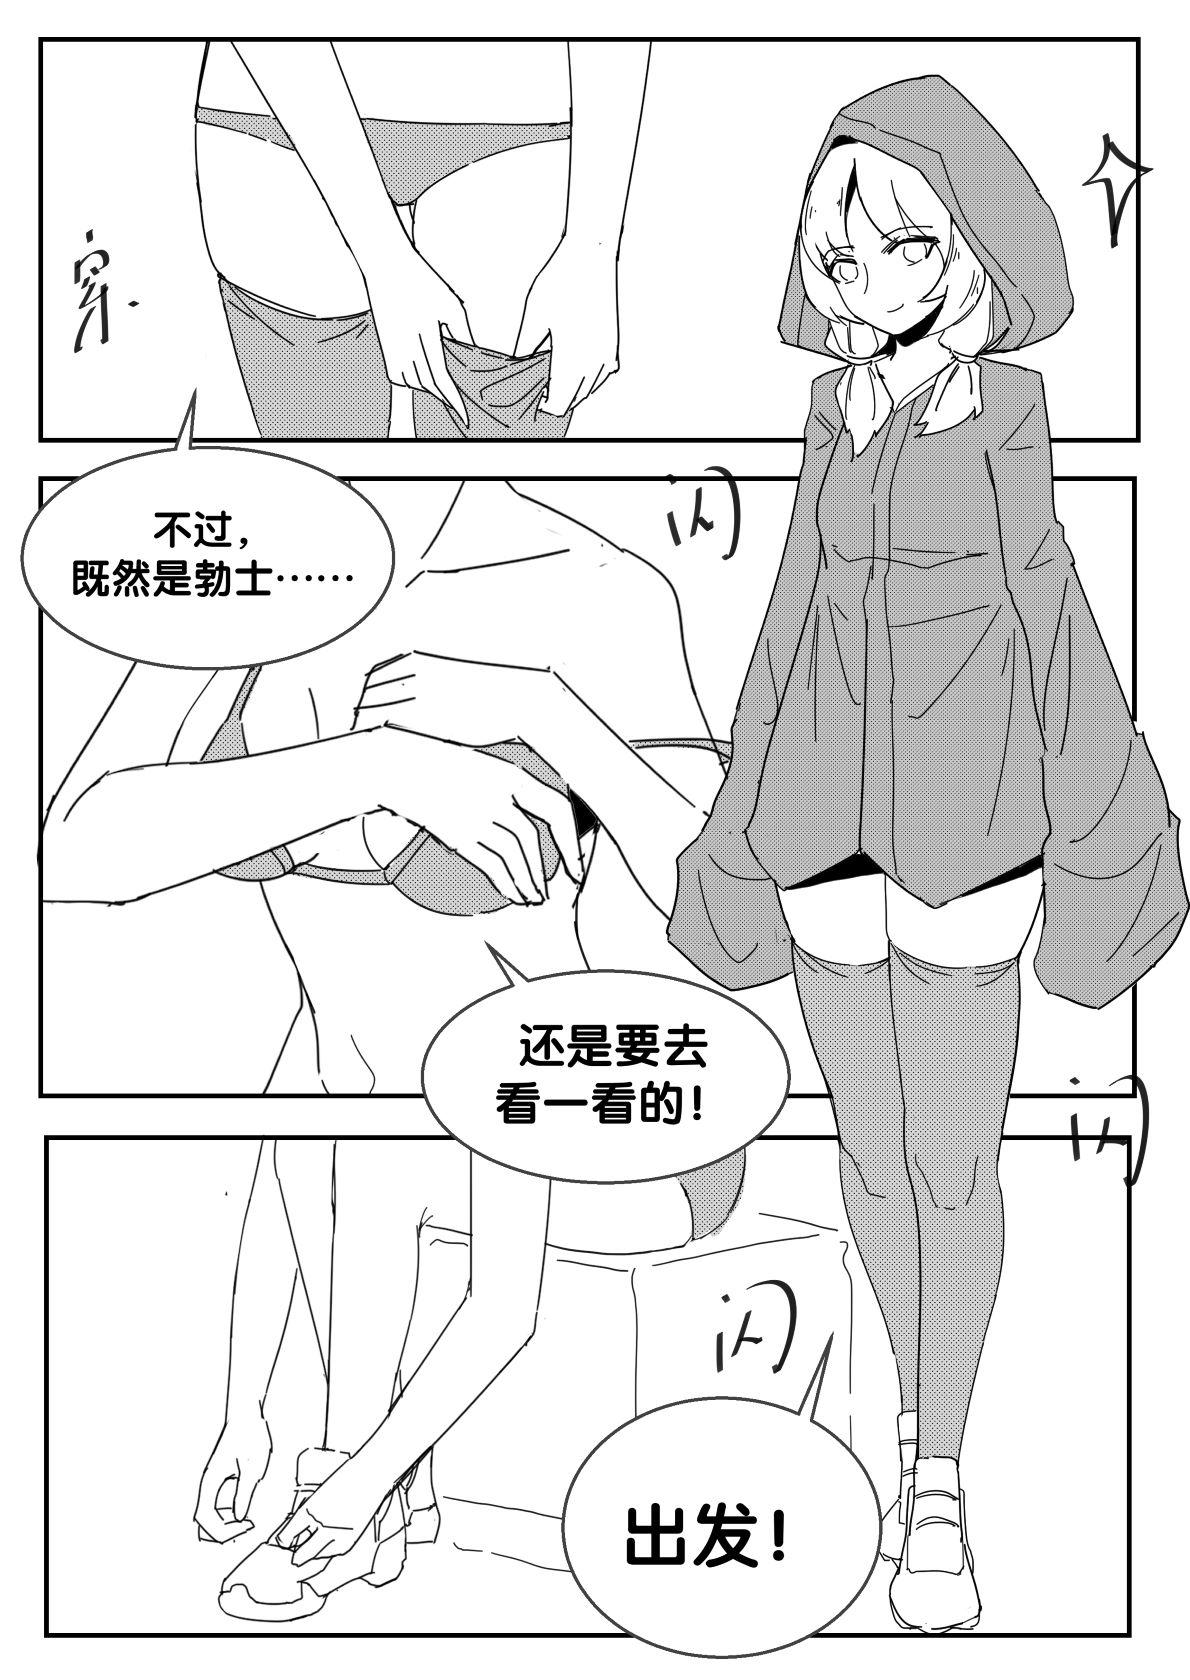 Lez Fuck 勃士日常其二 - Arknights Family - Page 8